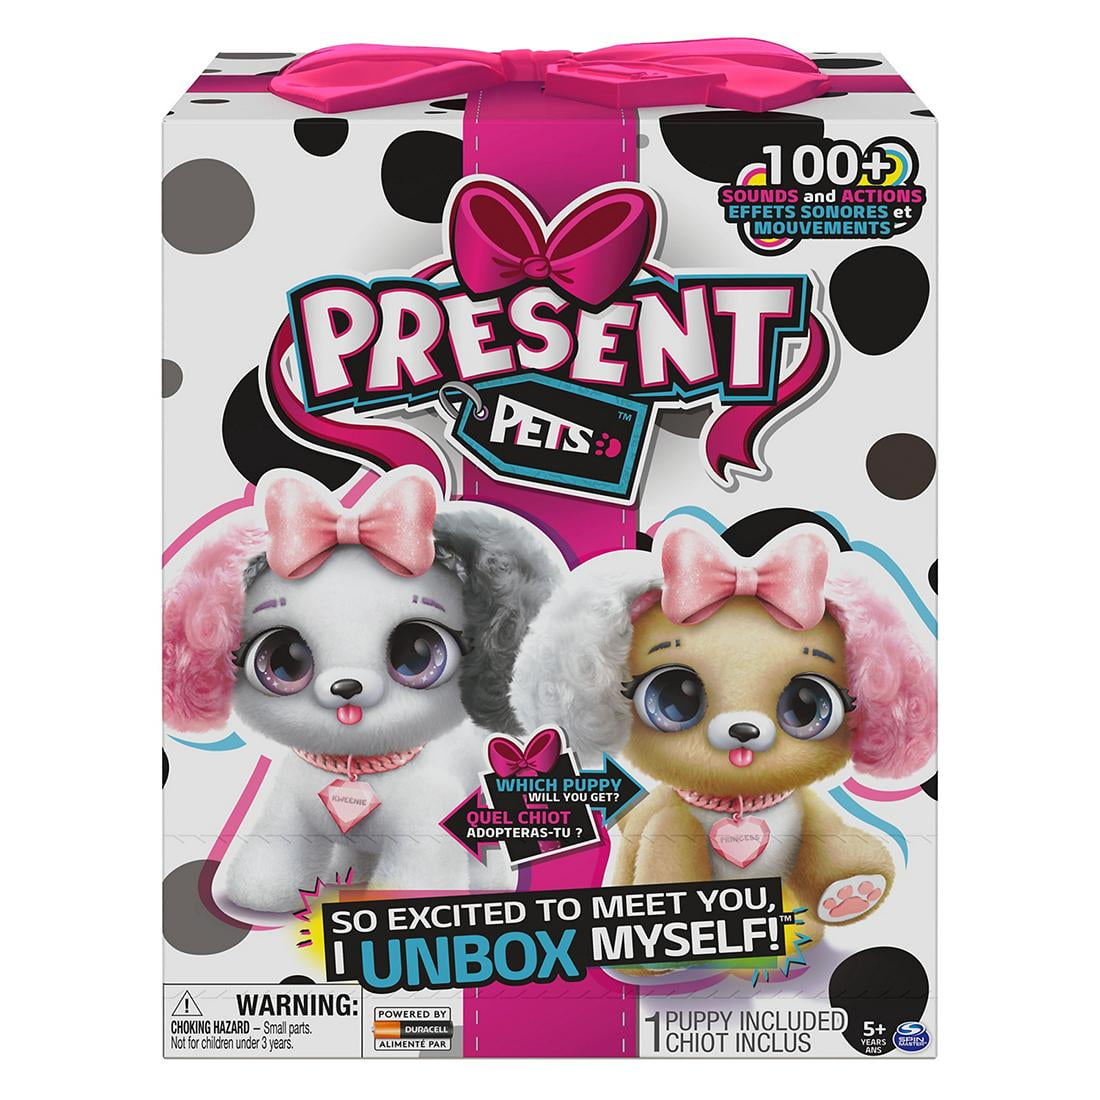 PRESENT PETS with LIMITED EDITION ACCESSORIES – Only at Walmart